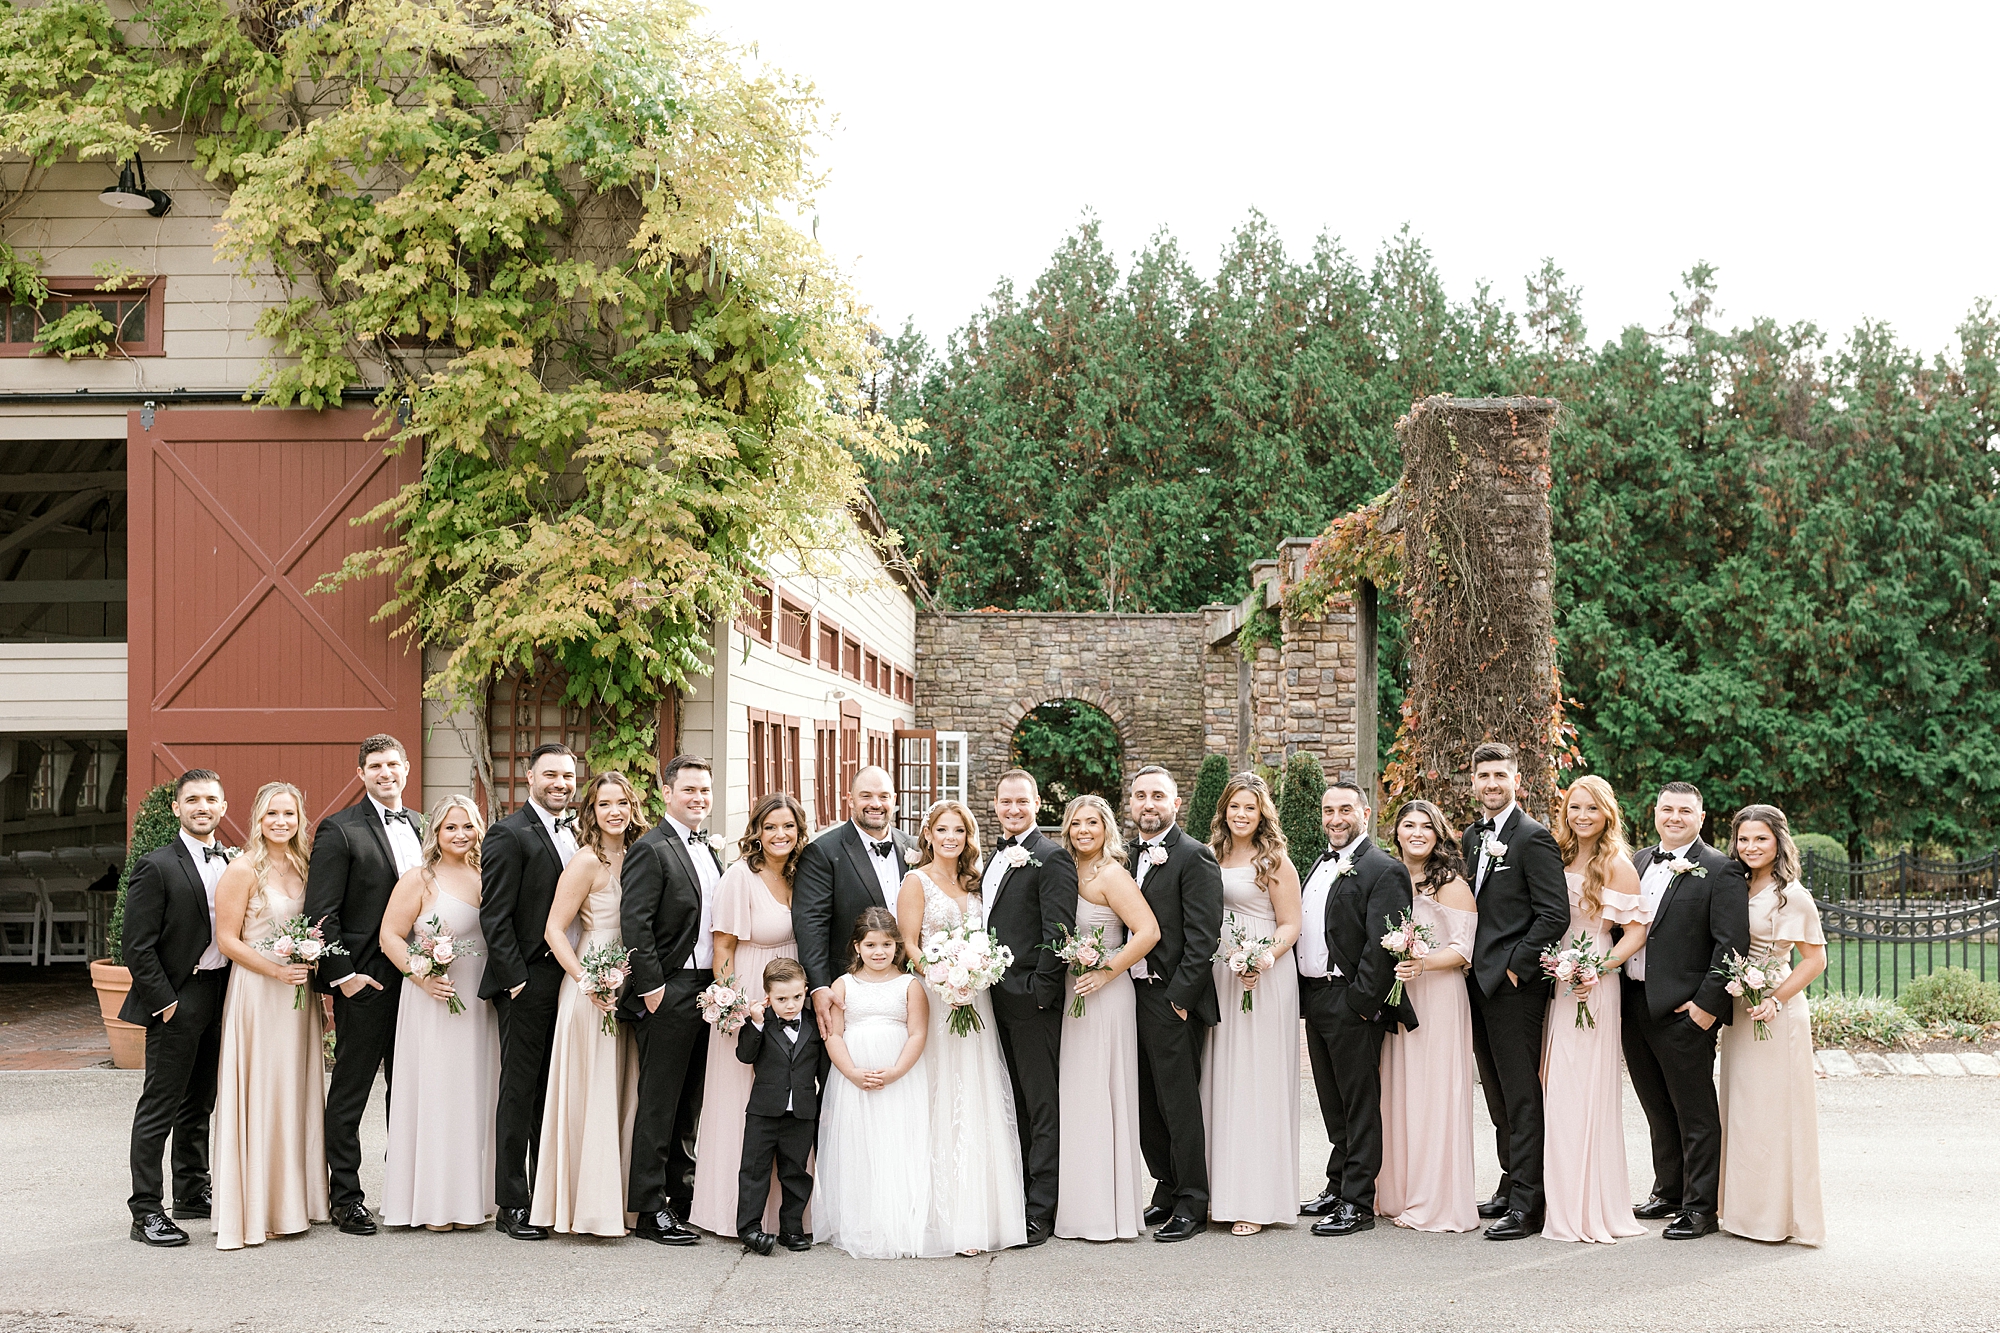 bride and groom pose with wedding party in black tuxes and champagne gowns at the Ashford Estate